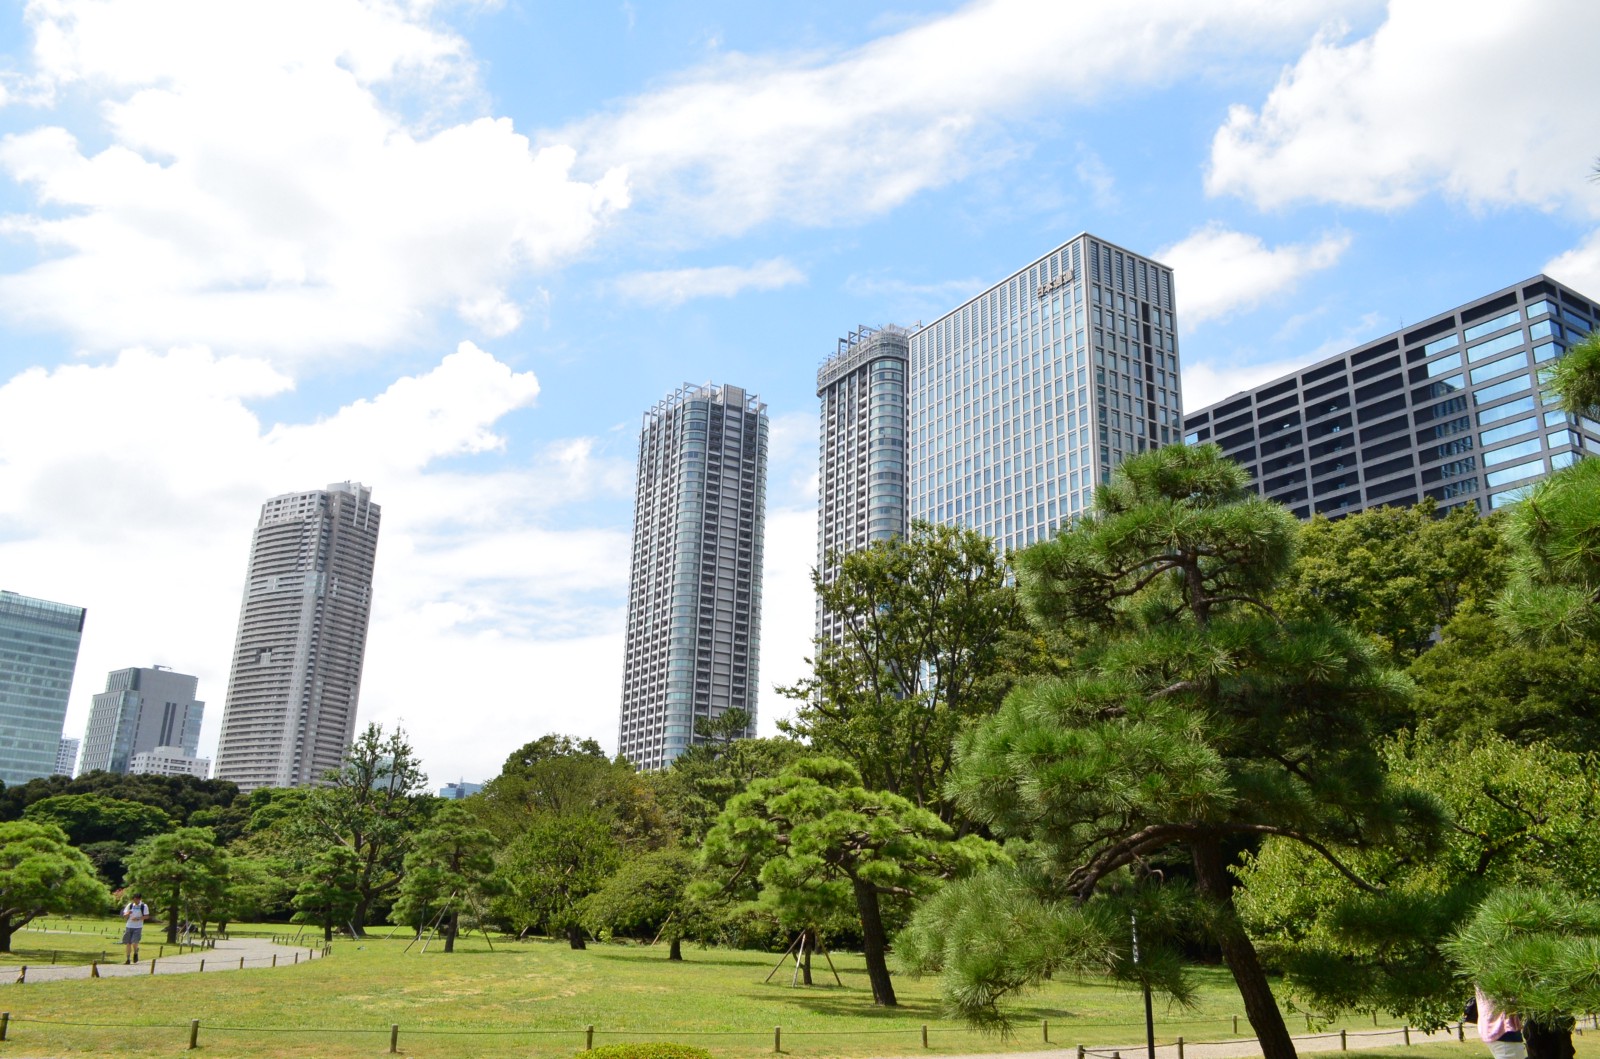 Oasis in the city: Hama Rikyu Garden surrounded by high-rise buildings